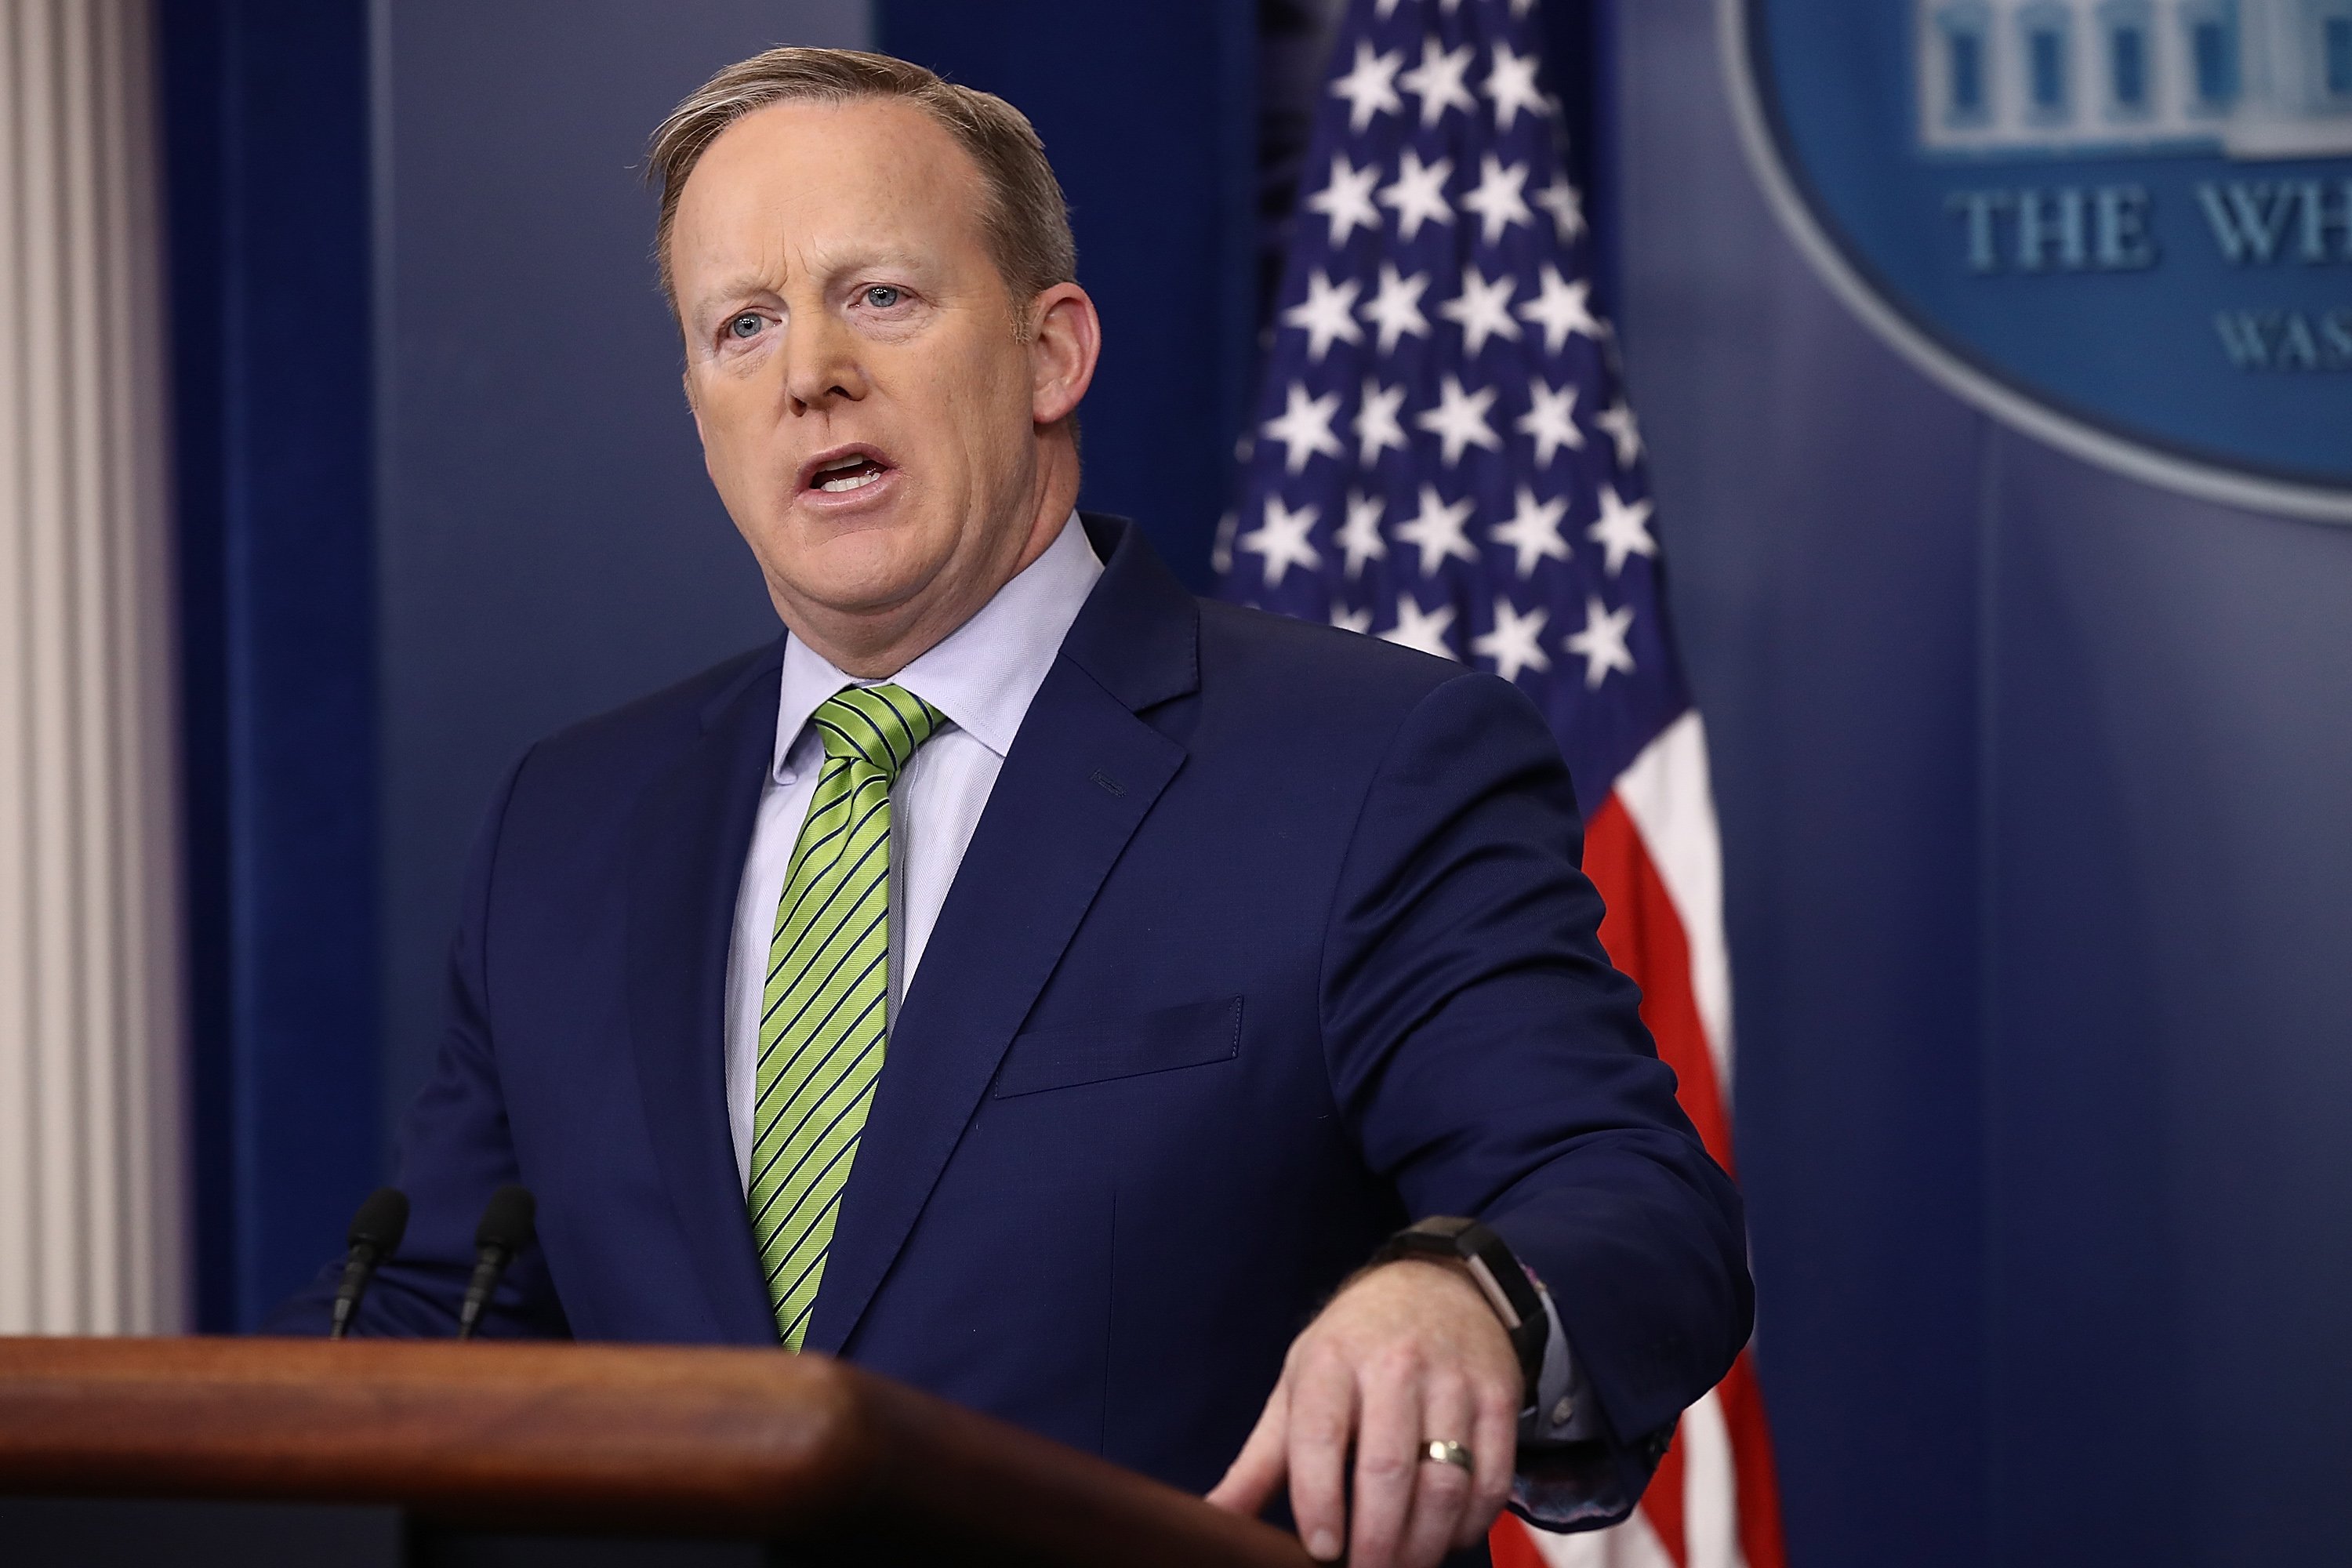 White House Press Secretary Sean Spicer answers questions in the White House on Feb. 2, 2017. (Win McNamee—Getty Images)